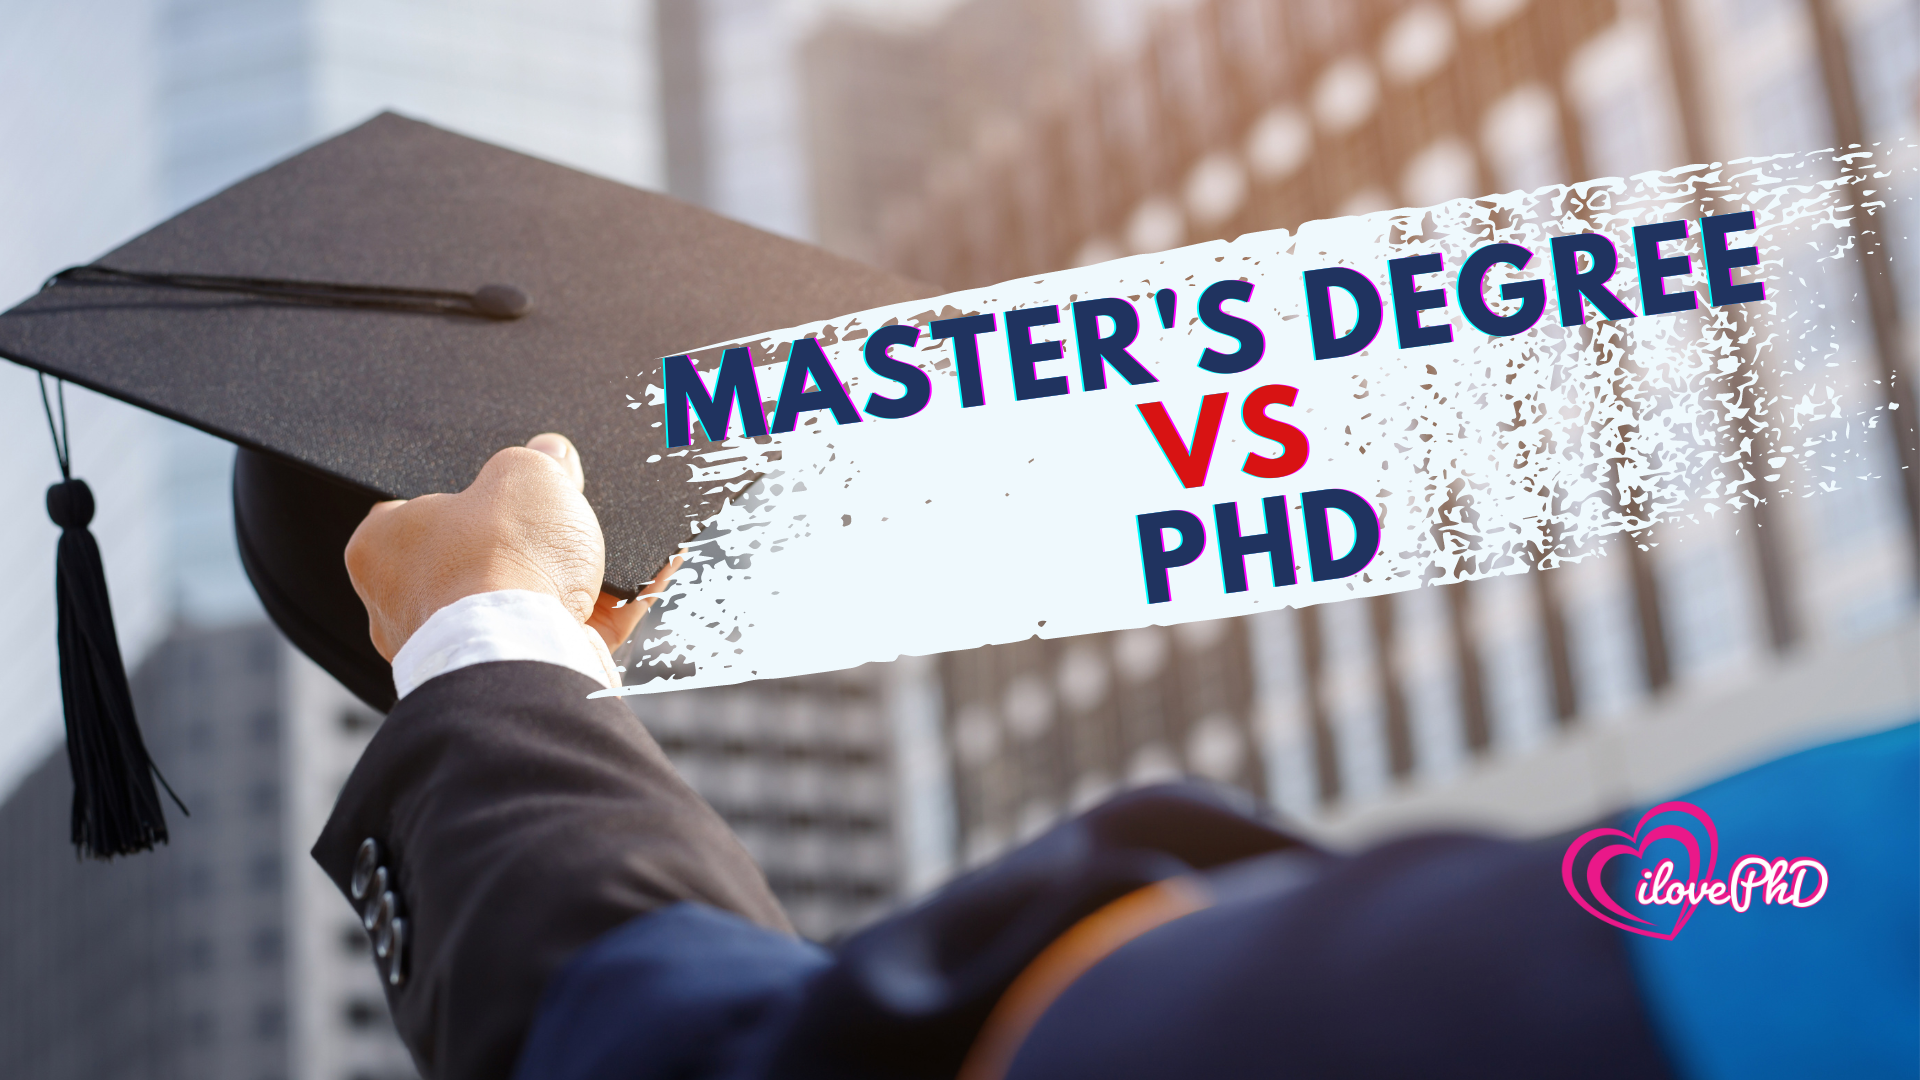 difference between degree and phd